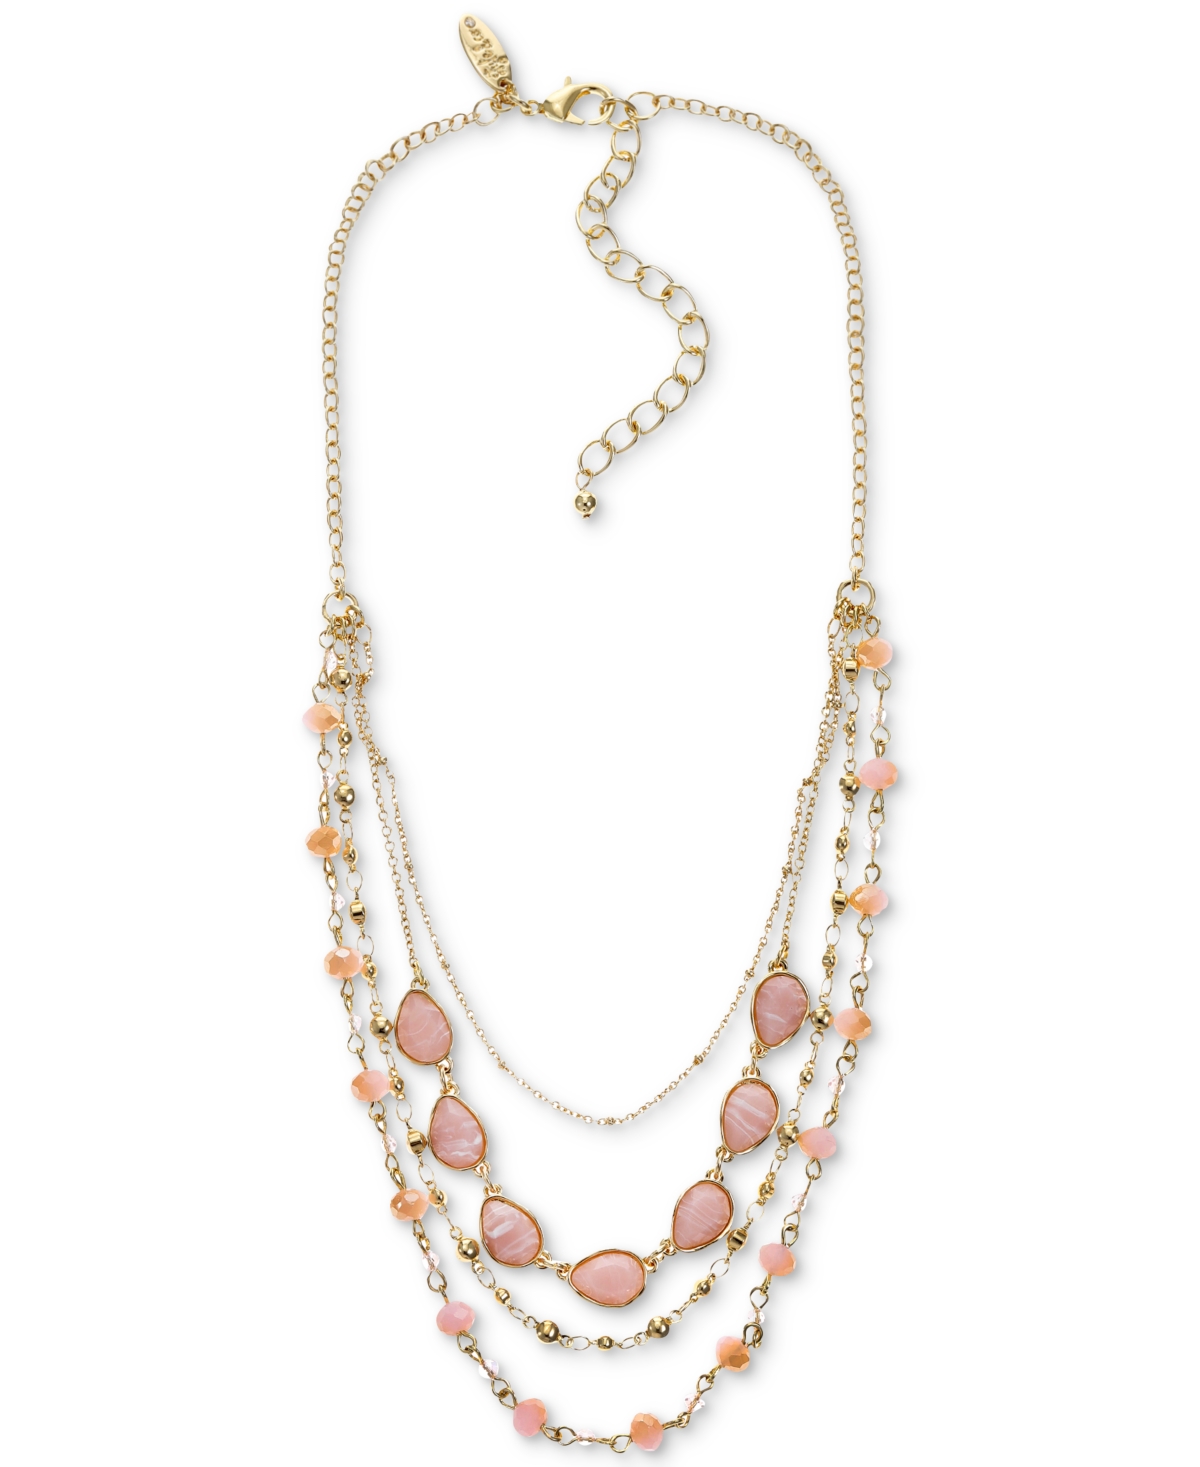 Gold-Tone Color Stone & Bead Layered Strand Necklace, 17" + 3" extender, Created for Macy's - Pink